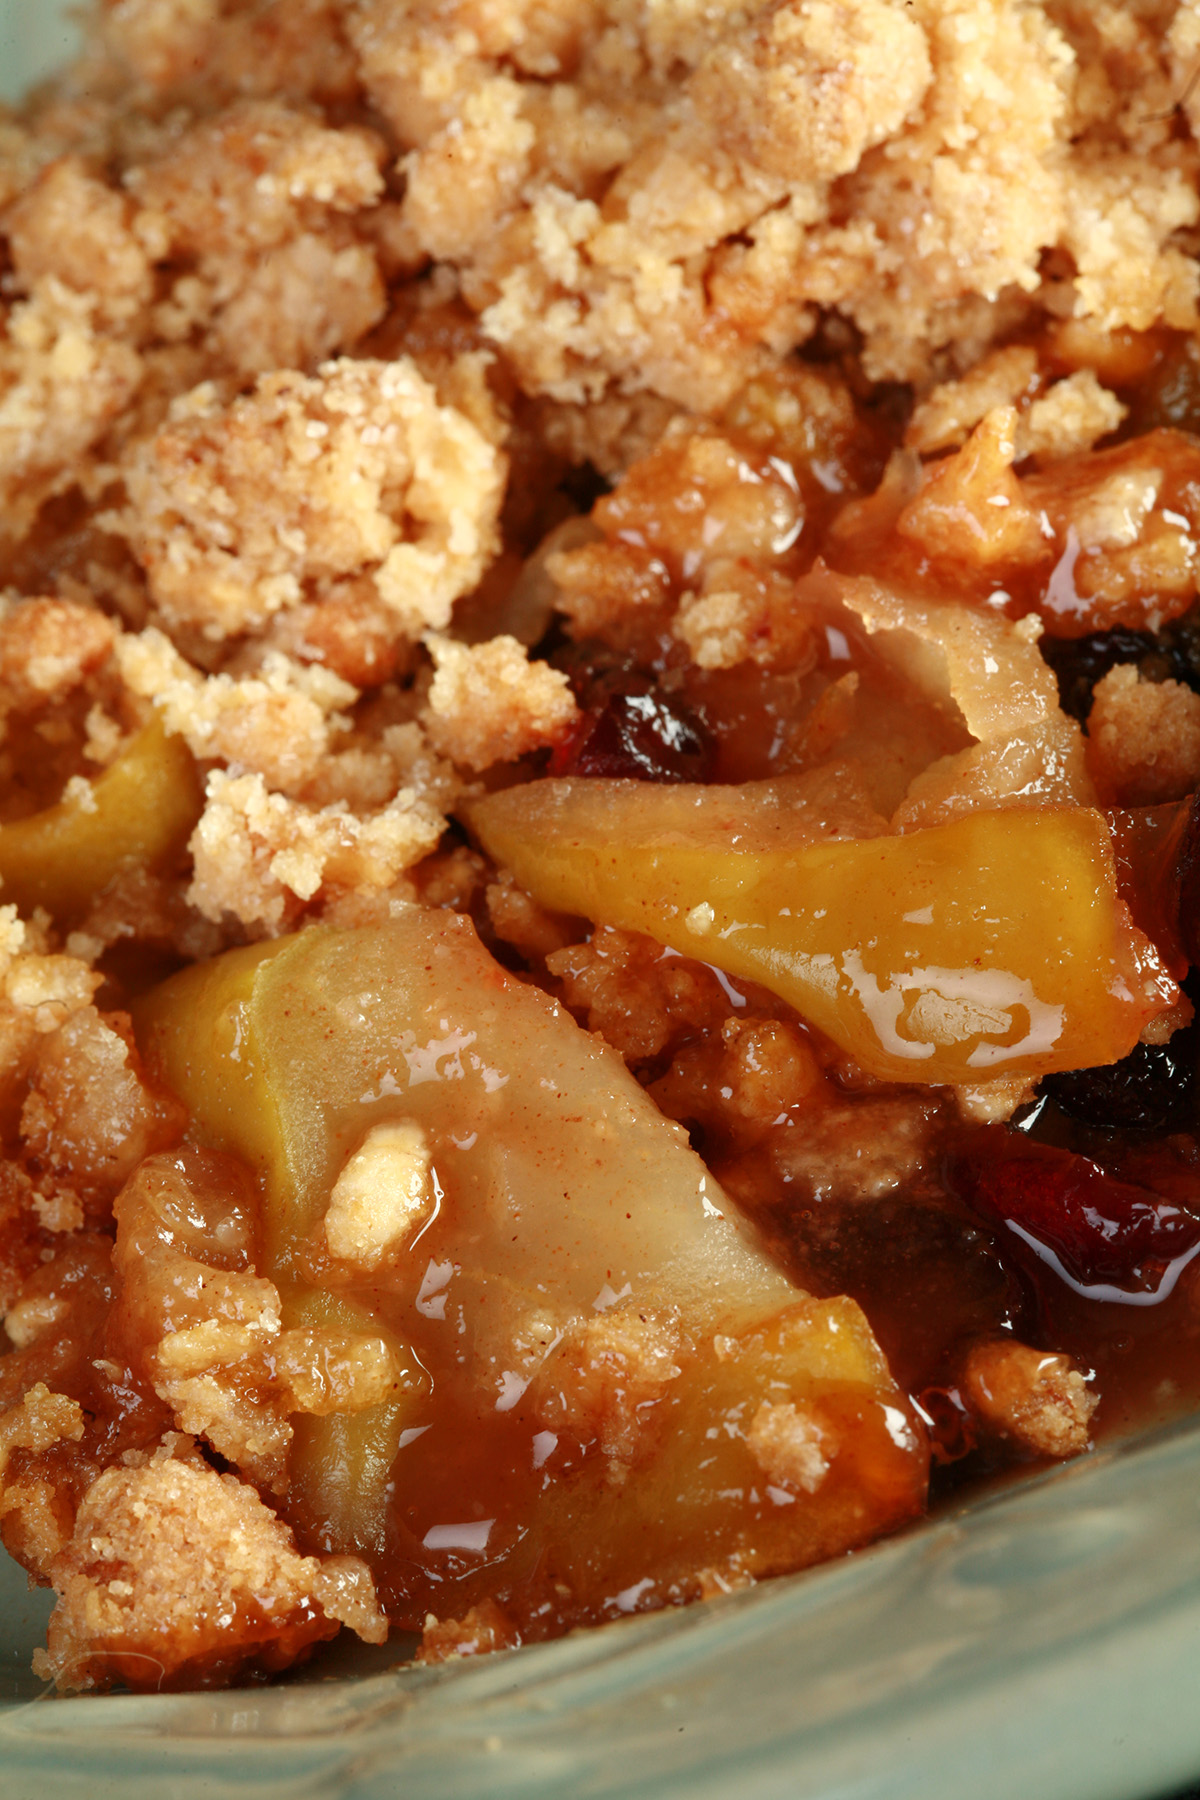 A plate with a generous serving of gluten-free Brandied Apple Crisp.